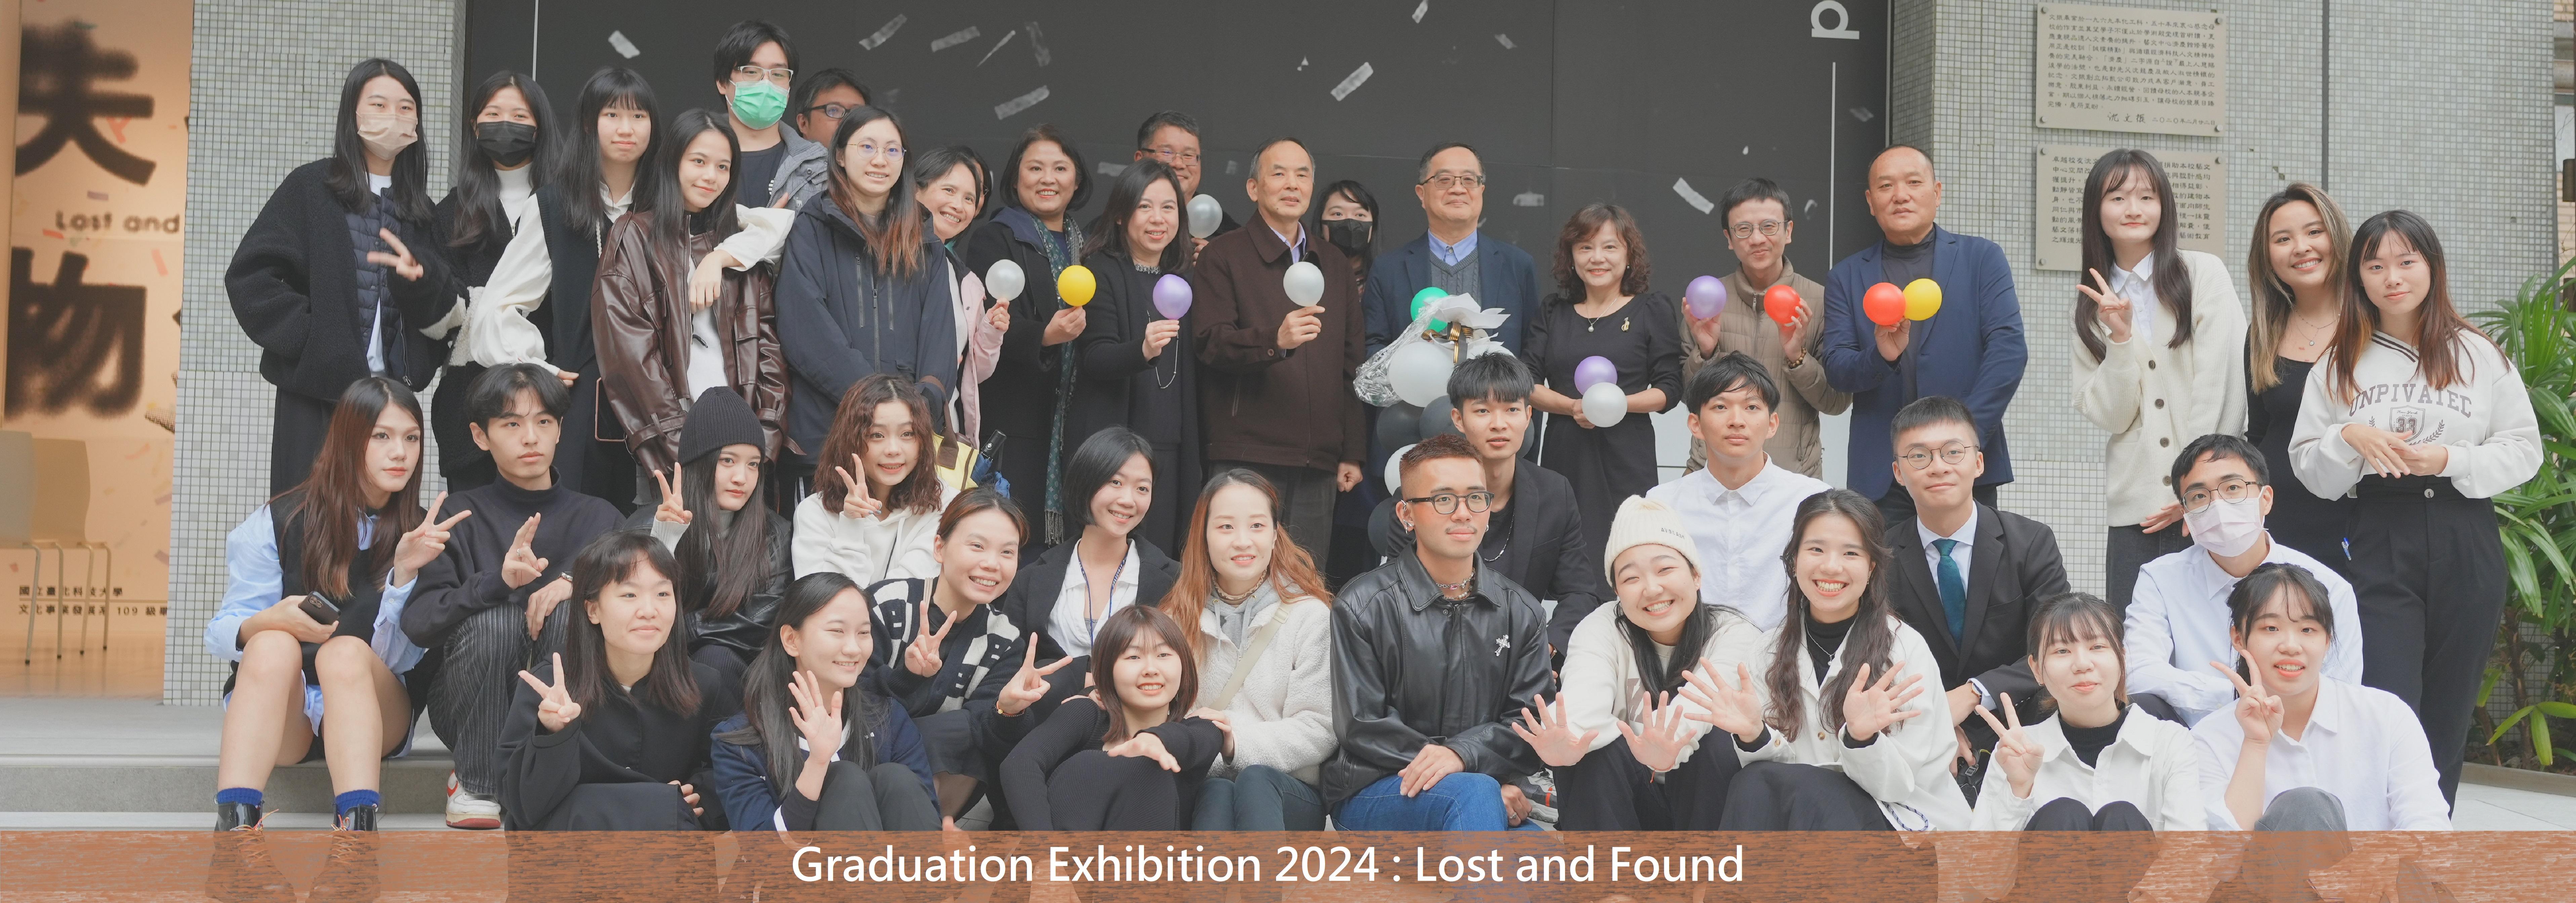 Graduation Exhibition 2024 : Lost and Found